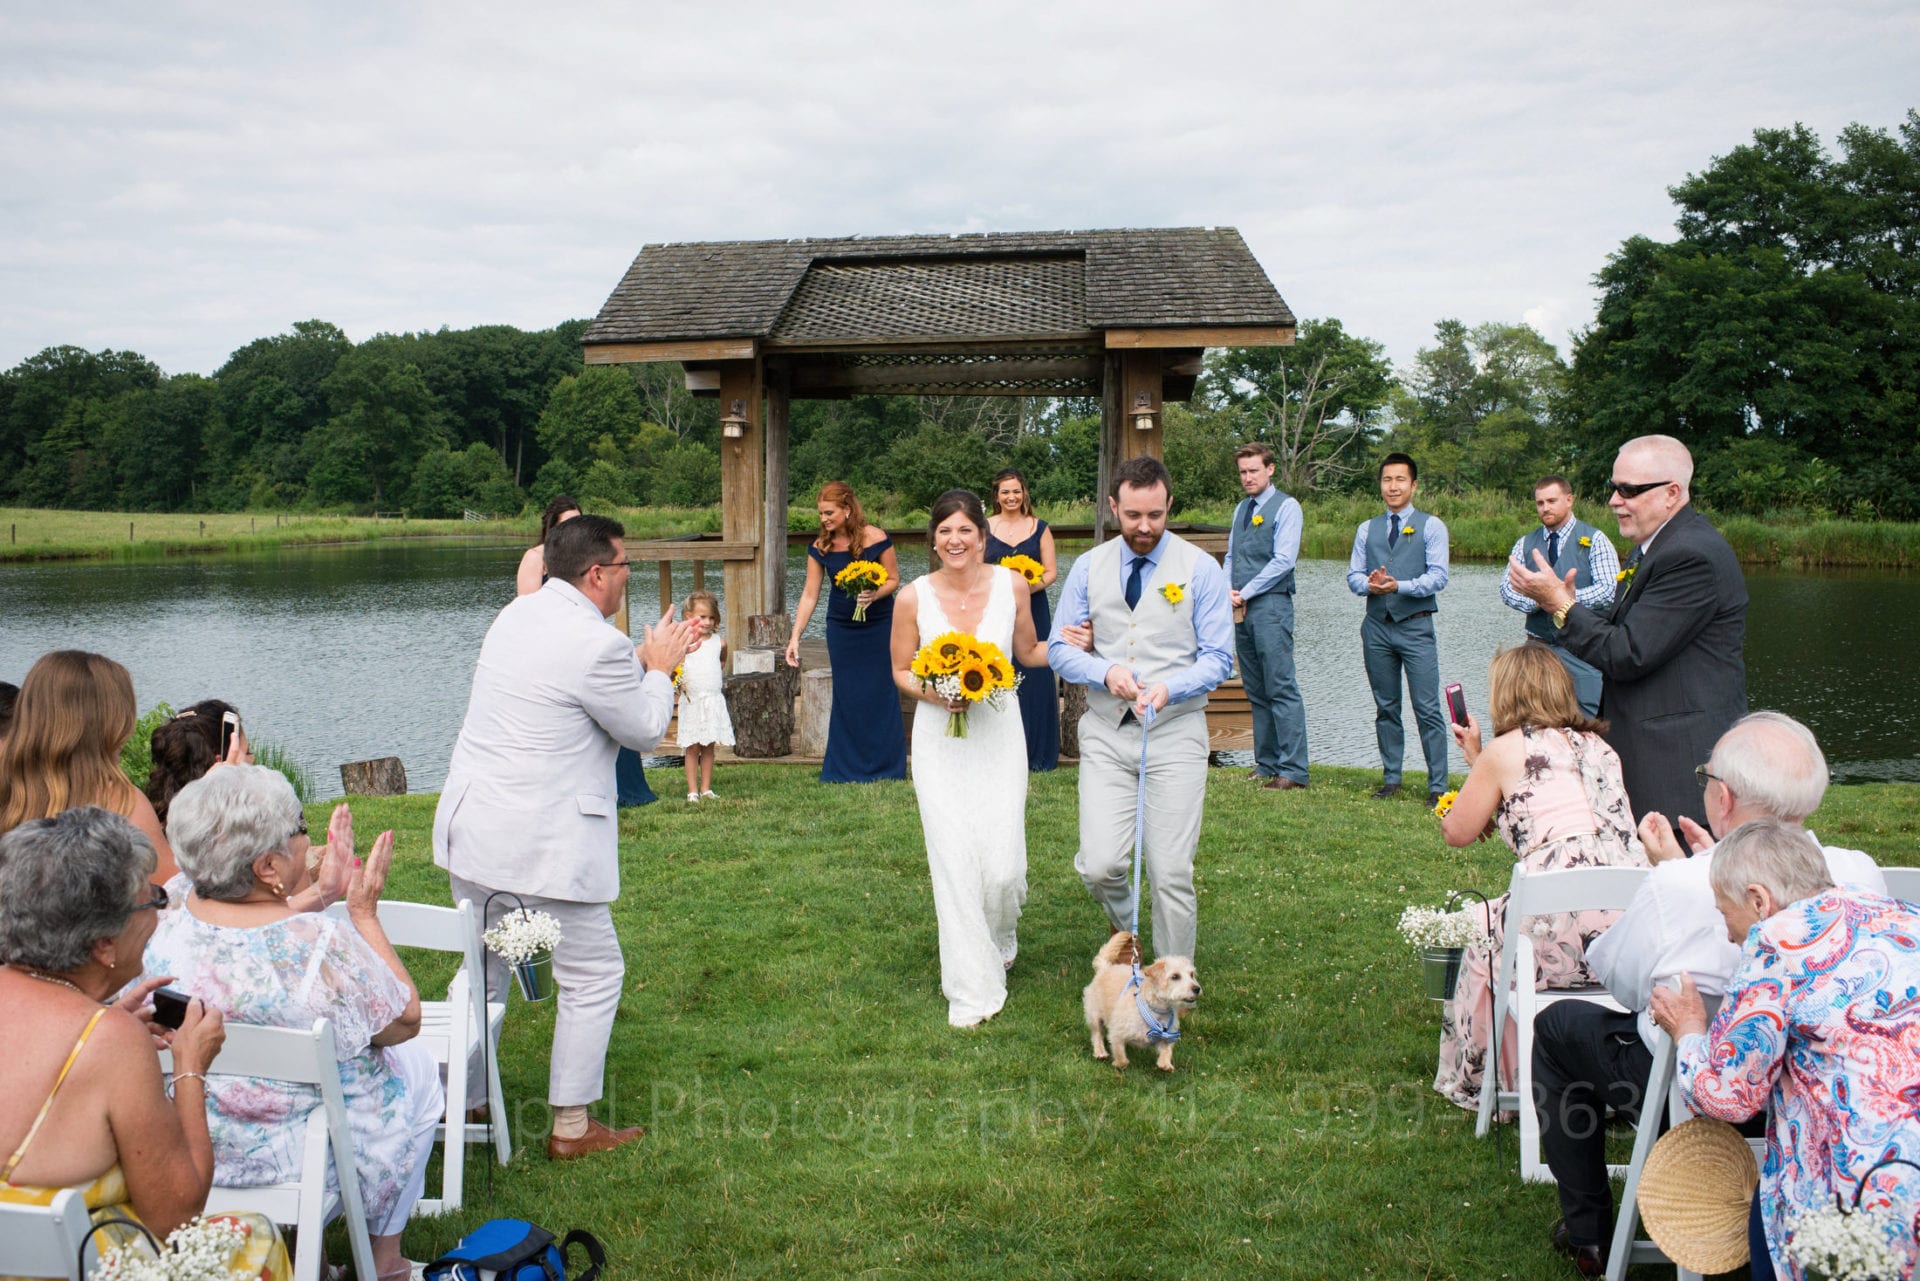 A bride and groom walk down an aisle between chairs set in a field by a pond after their Armstrong Farms Wedding. The groom is holding a leash as their terrier leads them.